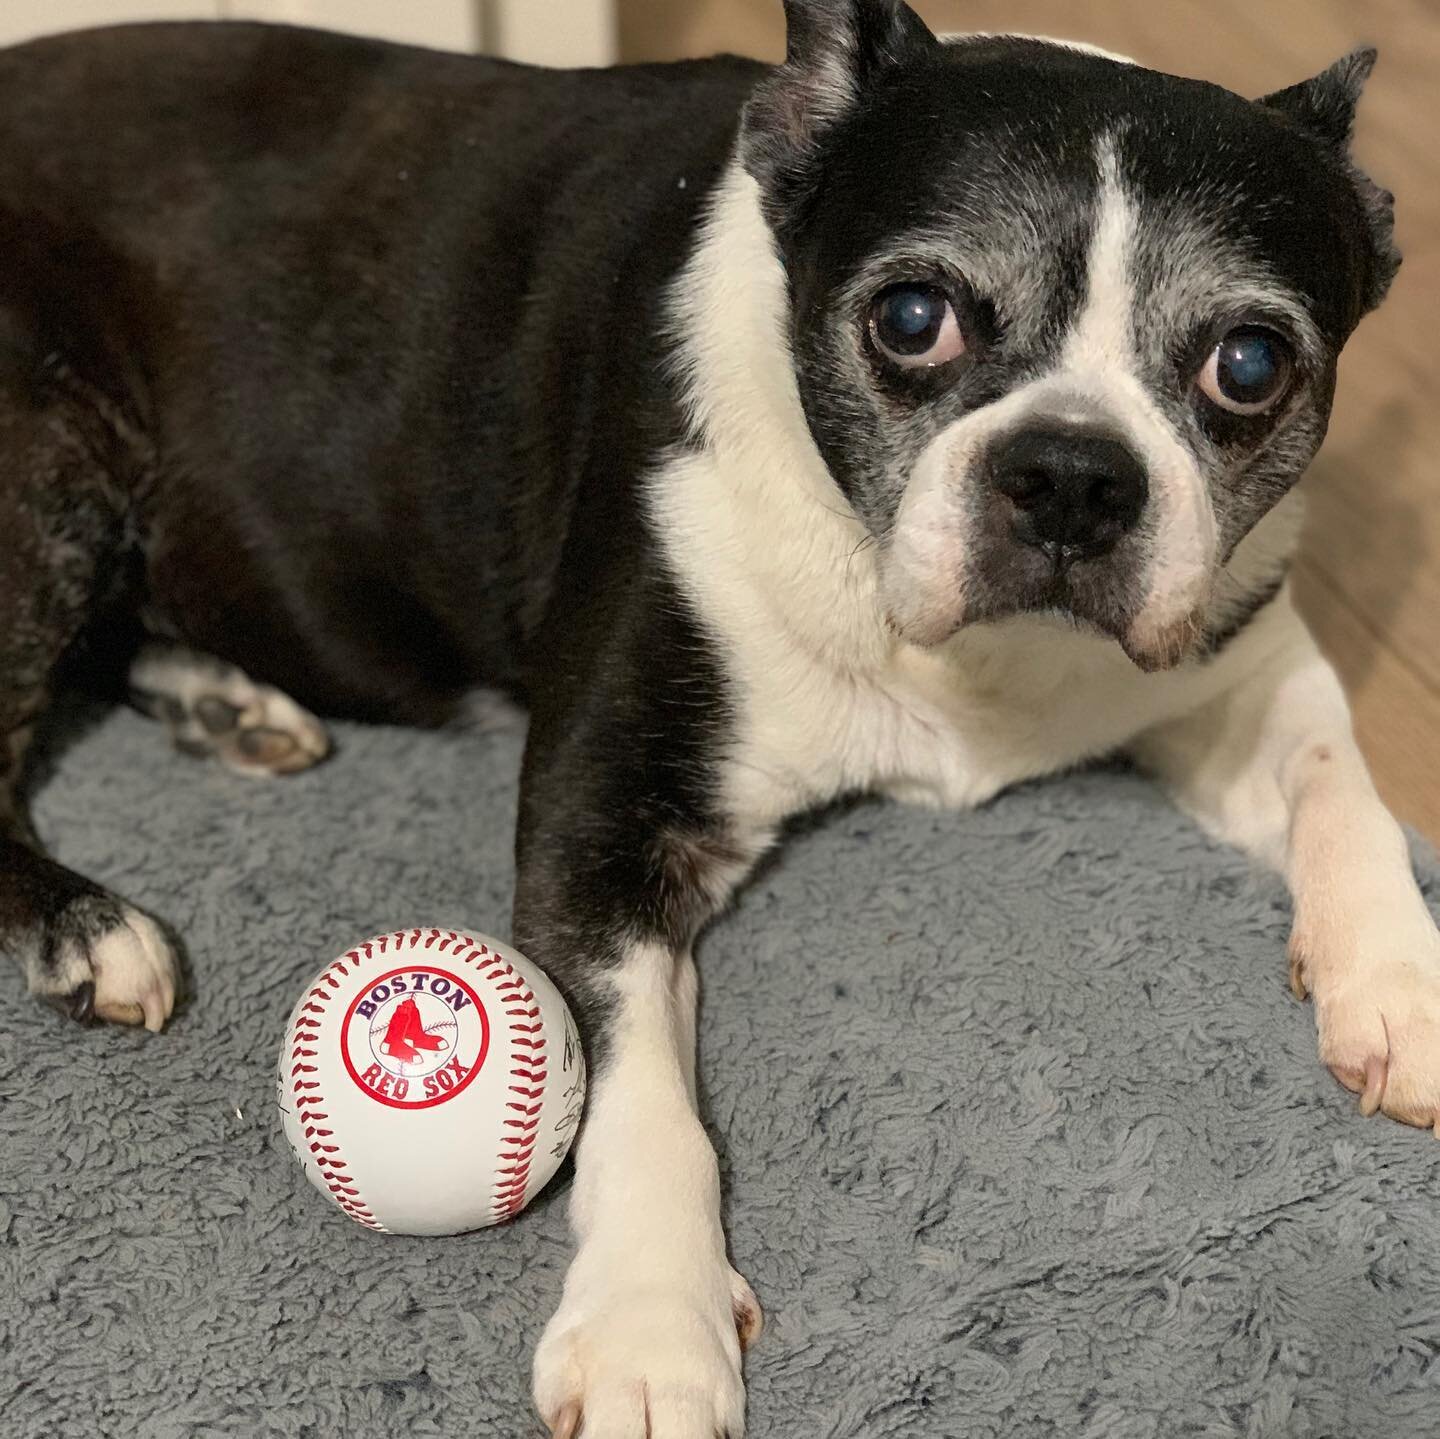 Hey @redsox , Lola is an old, crafty lefty that is ready to come in and close it out for the win!  Tessie, on the other hand, is currently listed as &lsquo;unavailable&rsquo;. #letsgoredsox #tessieandlolasavethedogs #100plusabandoneddogs #booksofinst